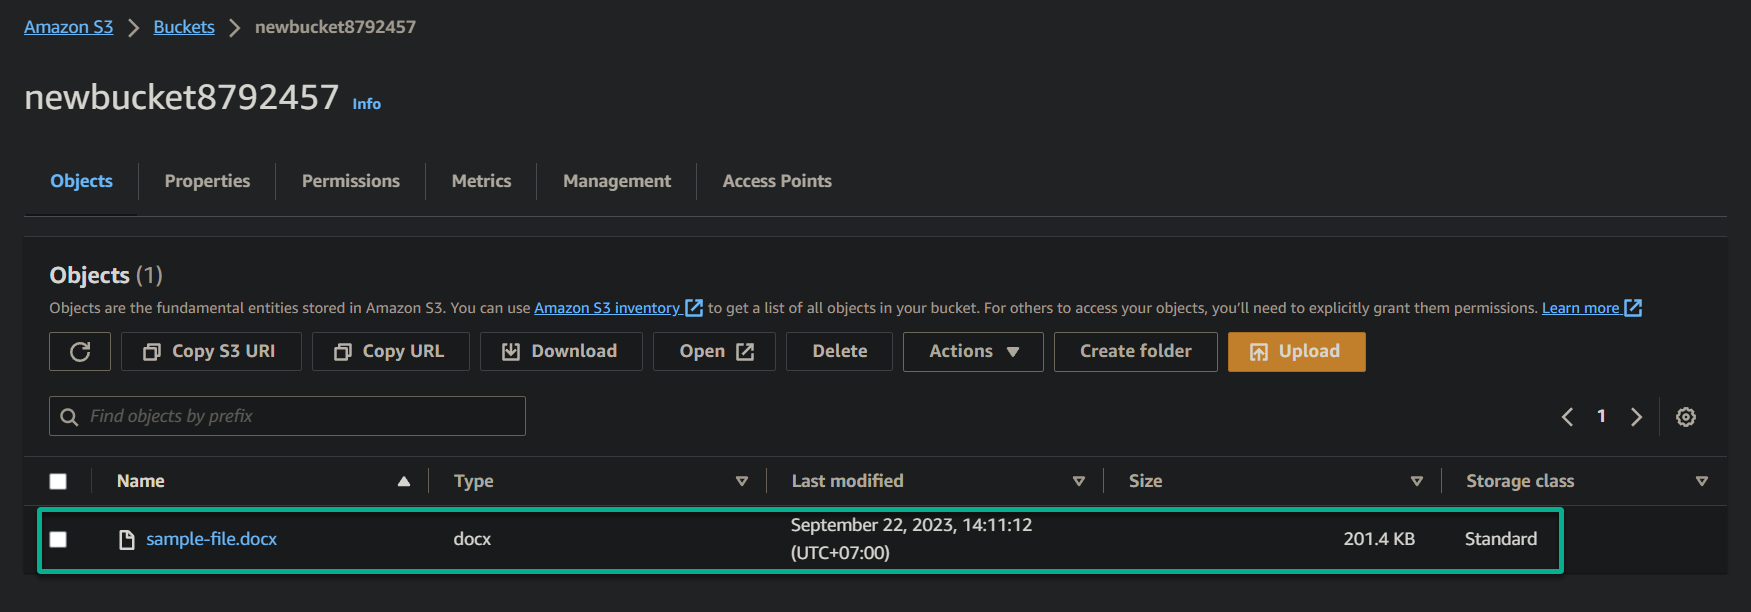 Verifying the uploaded file on the AWS S3 bucket via the AWS Management Console